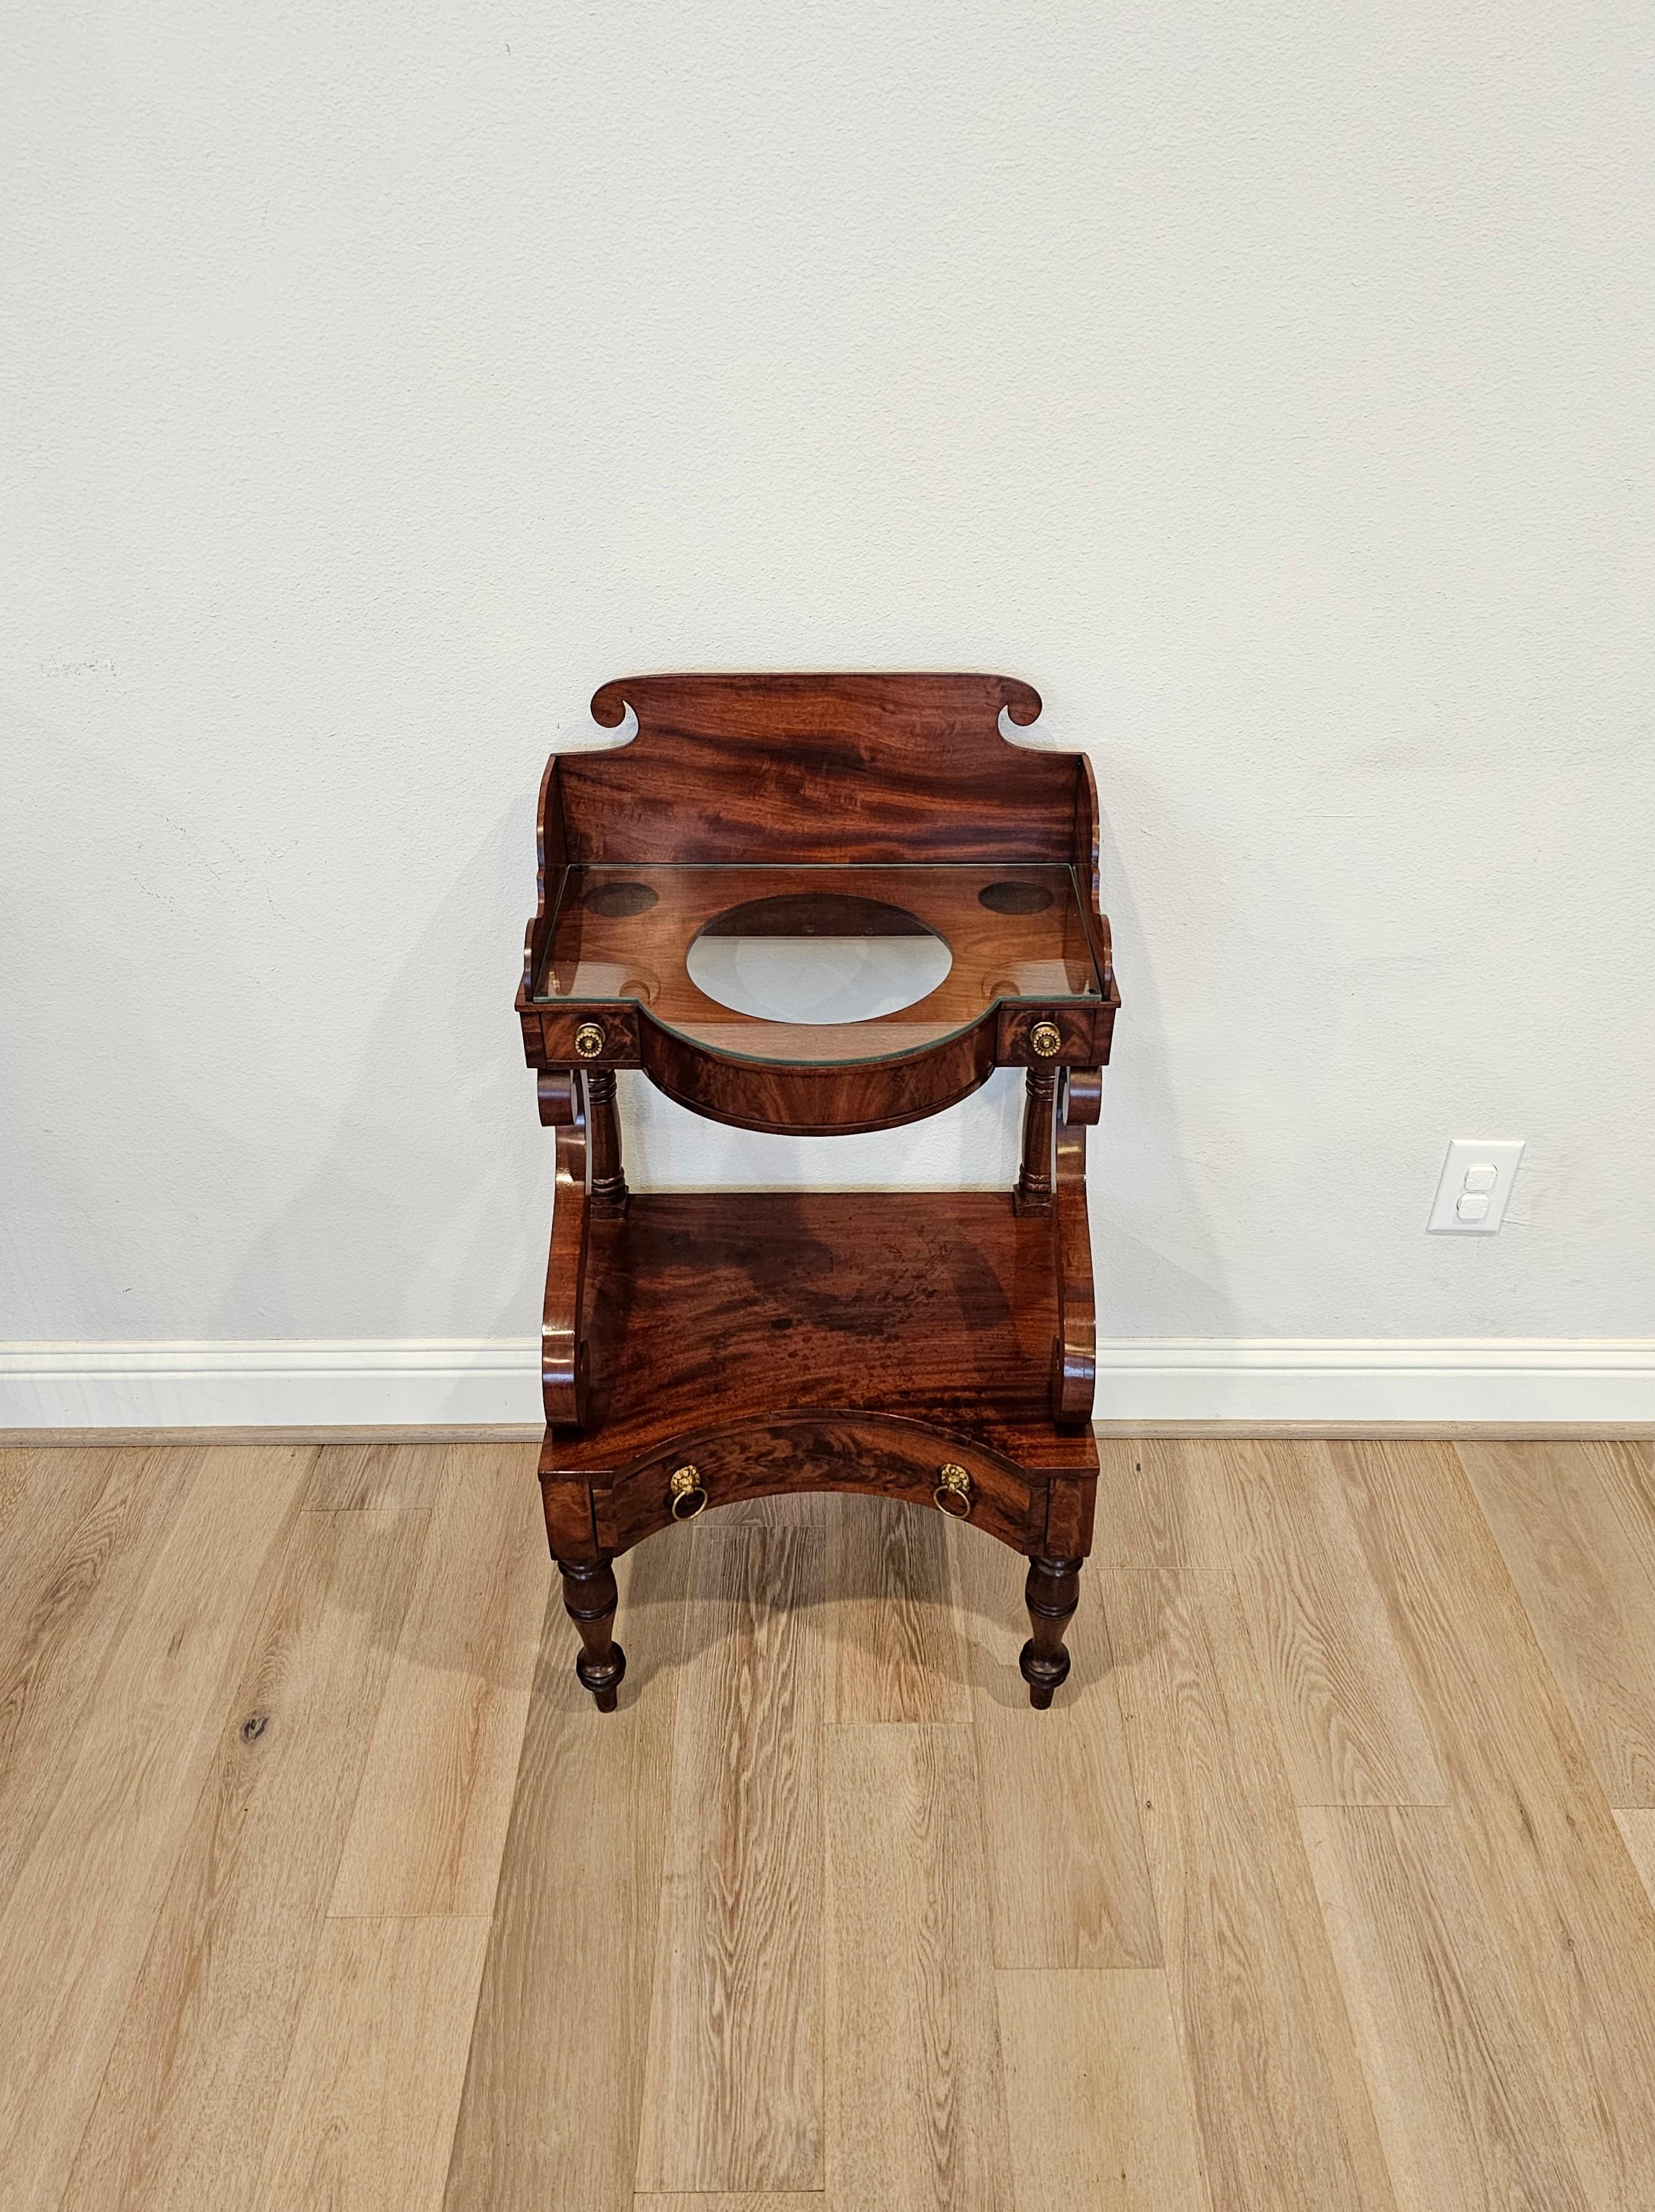 Early American Federal Period Flame Mahogany Antique Wash Stand  In Good Condition For Sale In Forney, TX